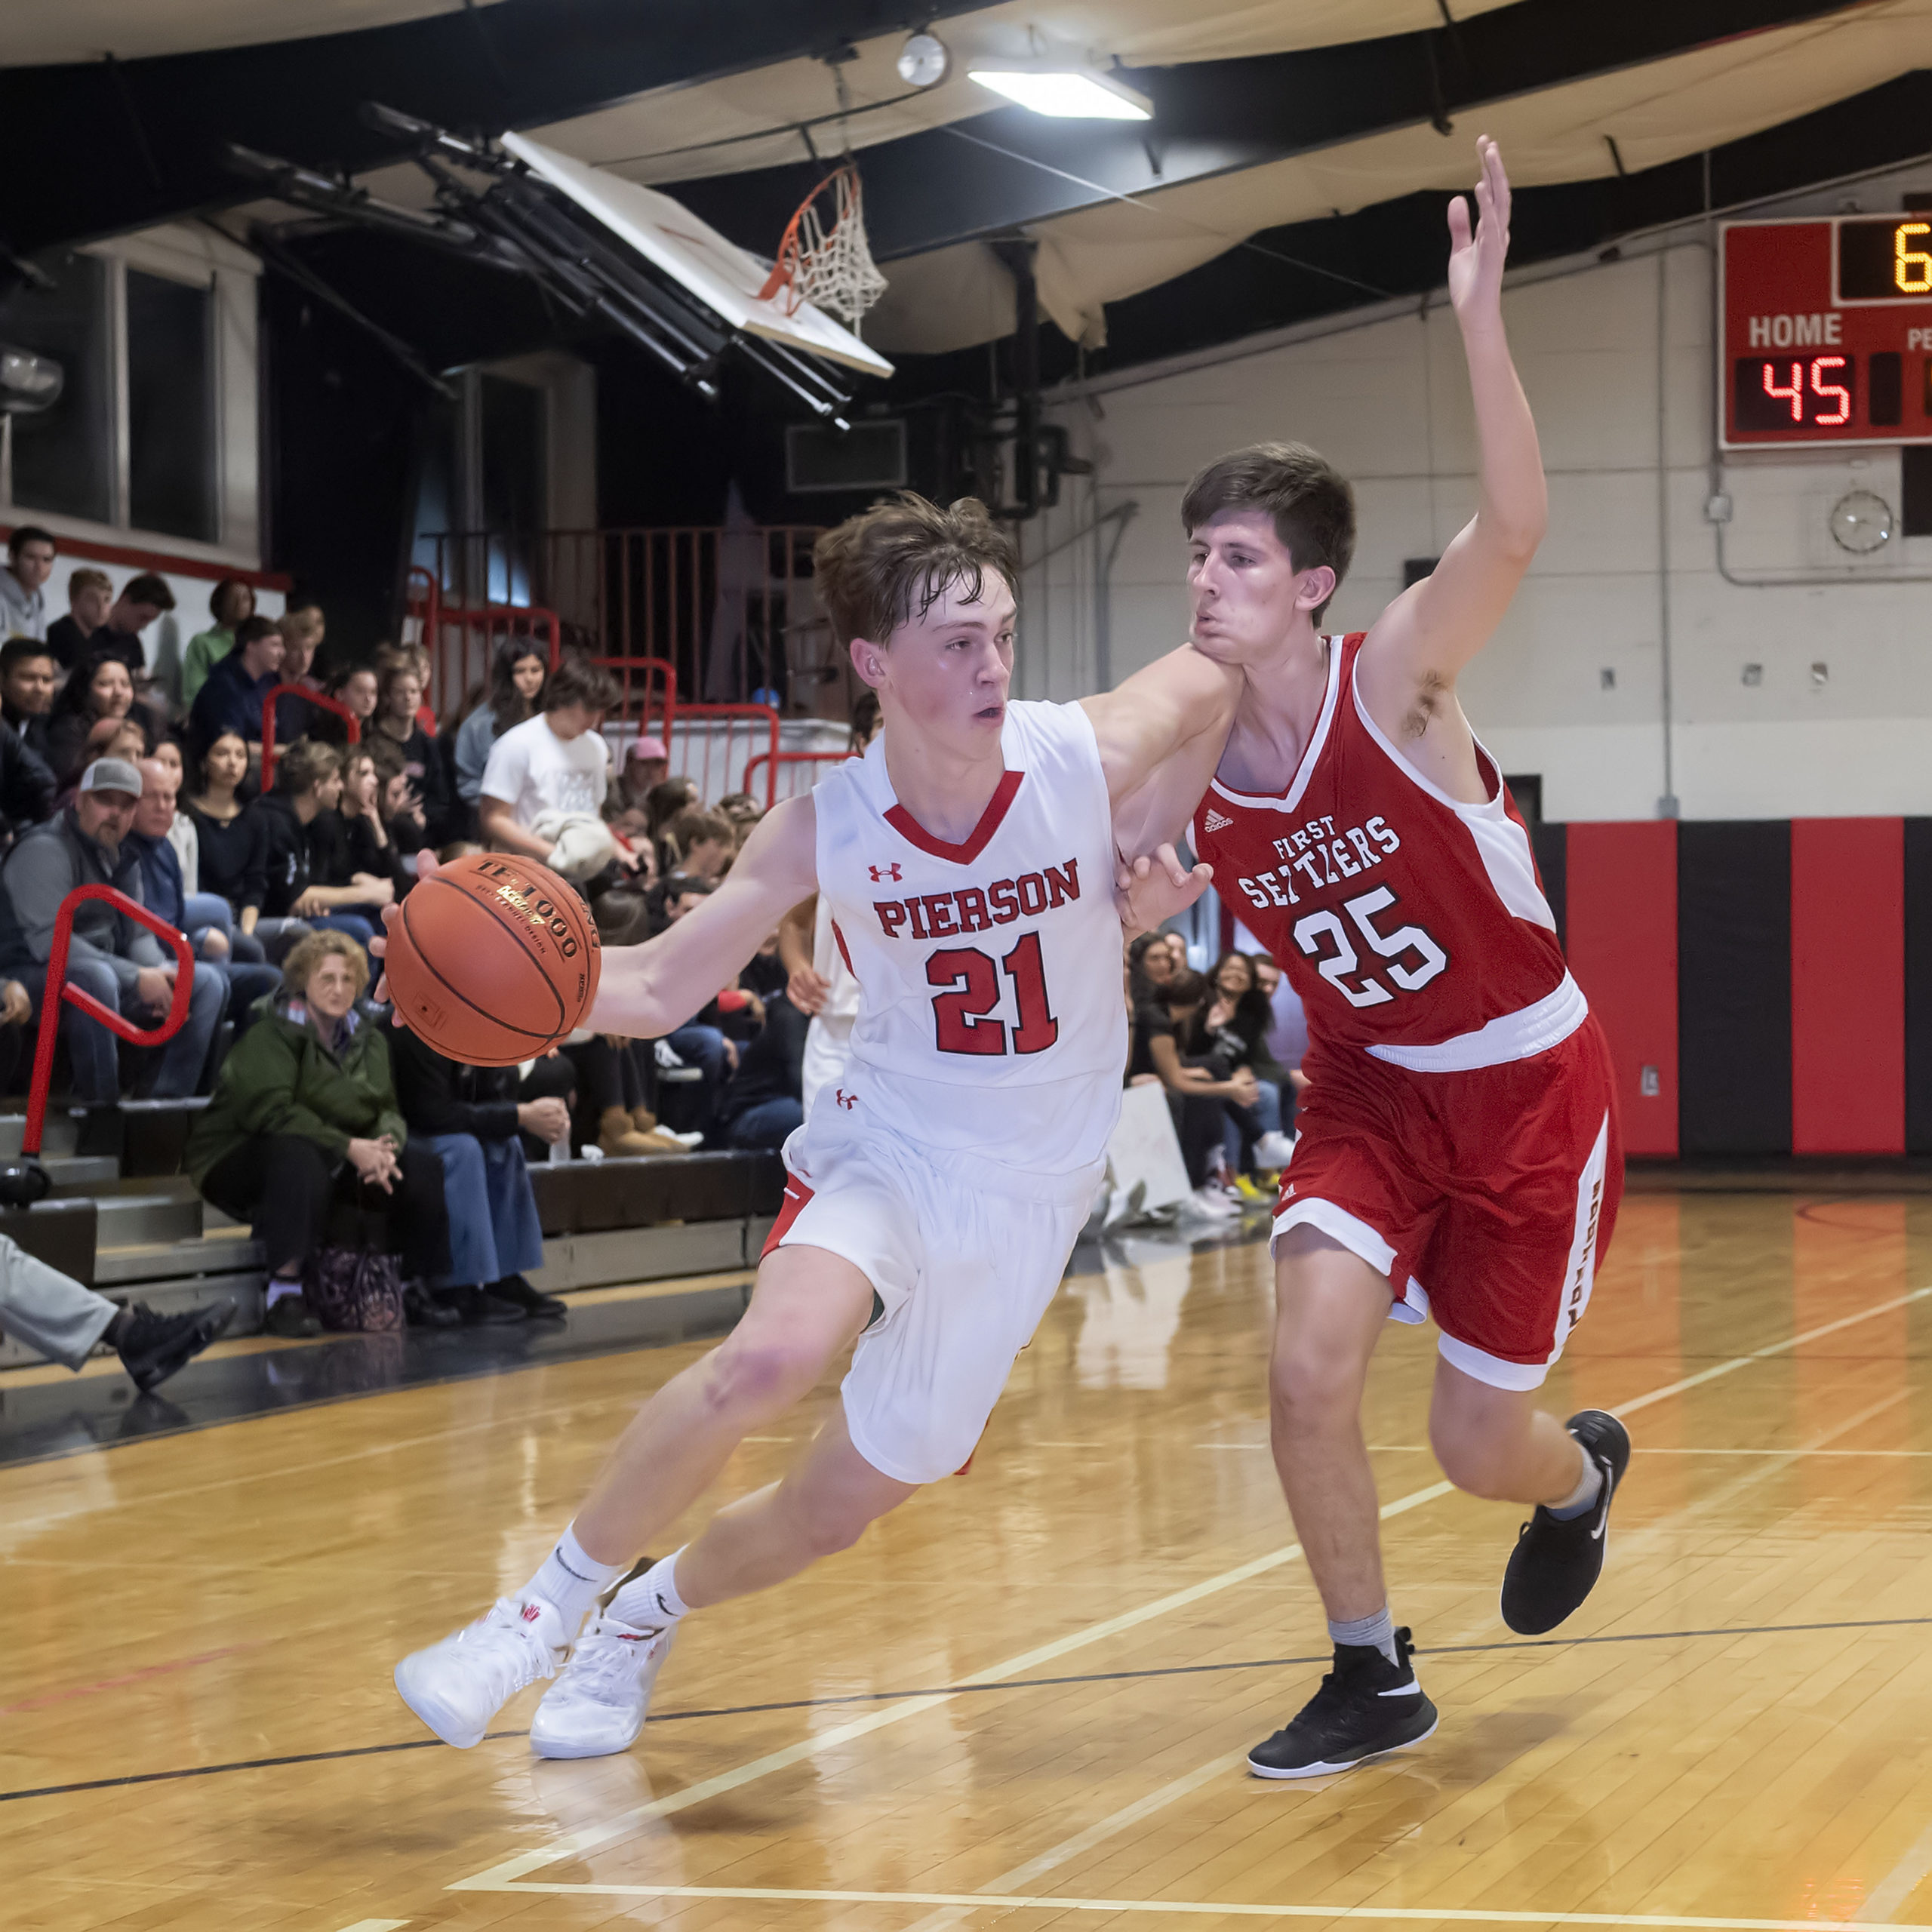 A Southold defender takes an inadvertant elbow to the chin from Pierson's Wilson Bennett who is driving to the basket.